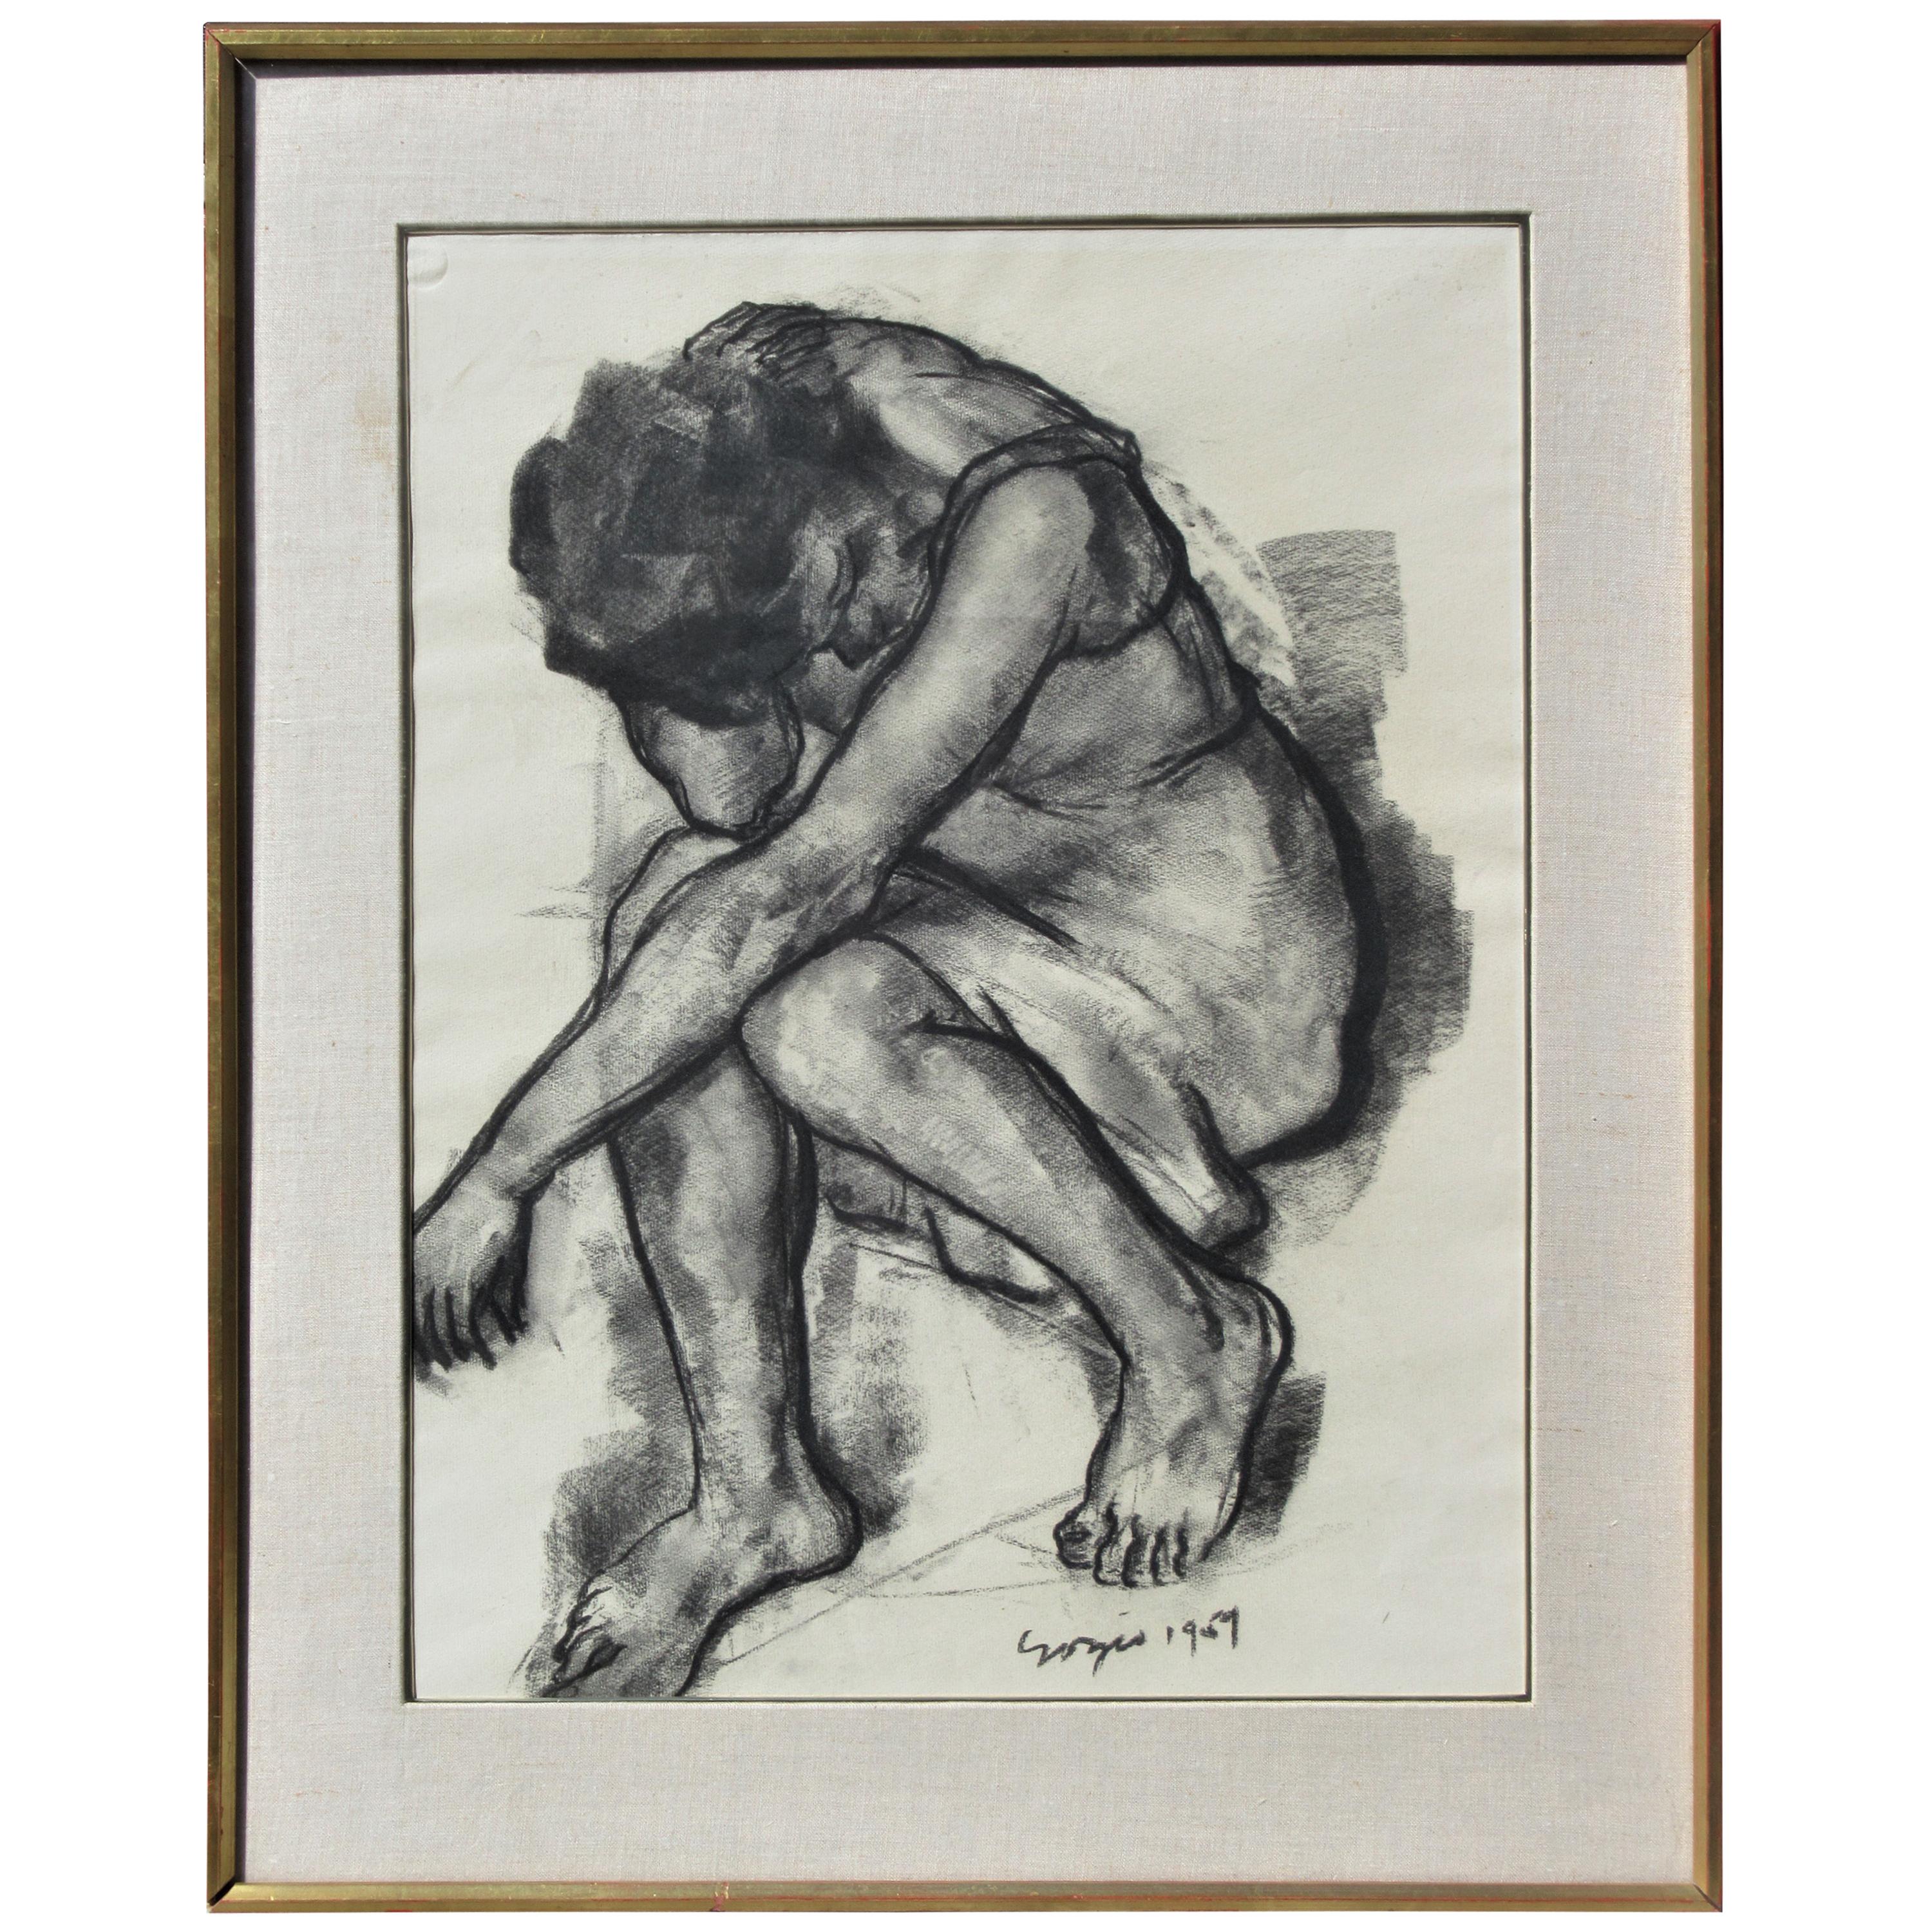  Drawing of a Woman - Soyer, 1957